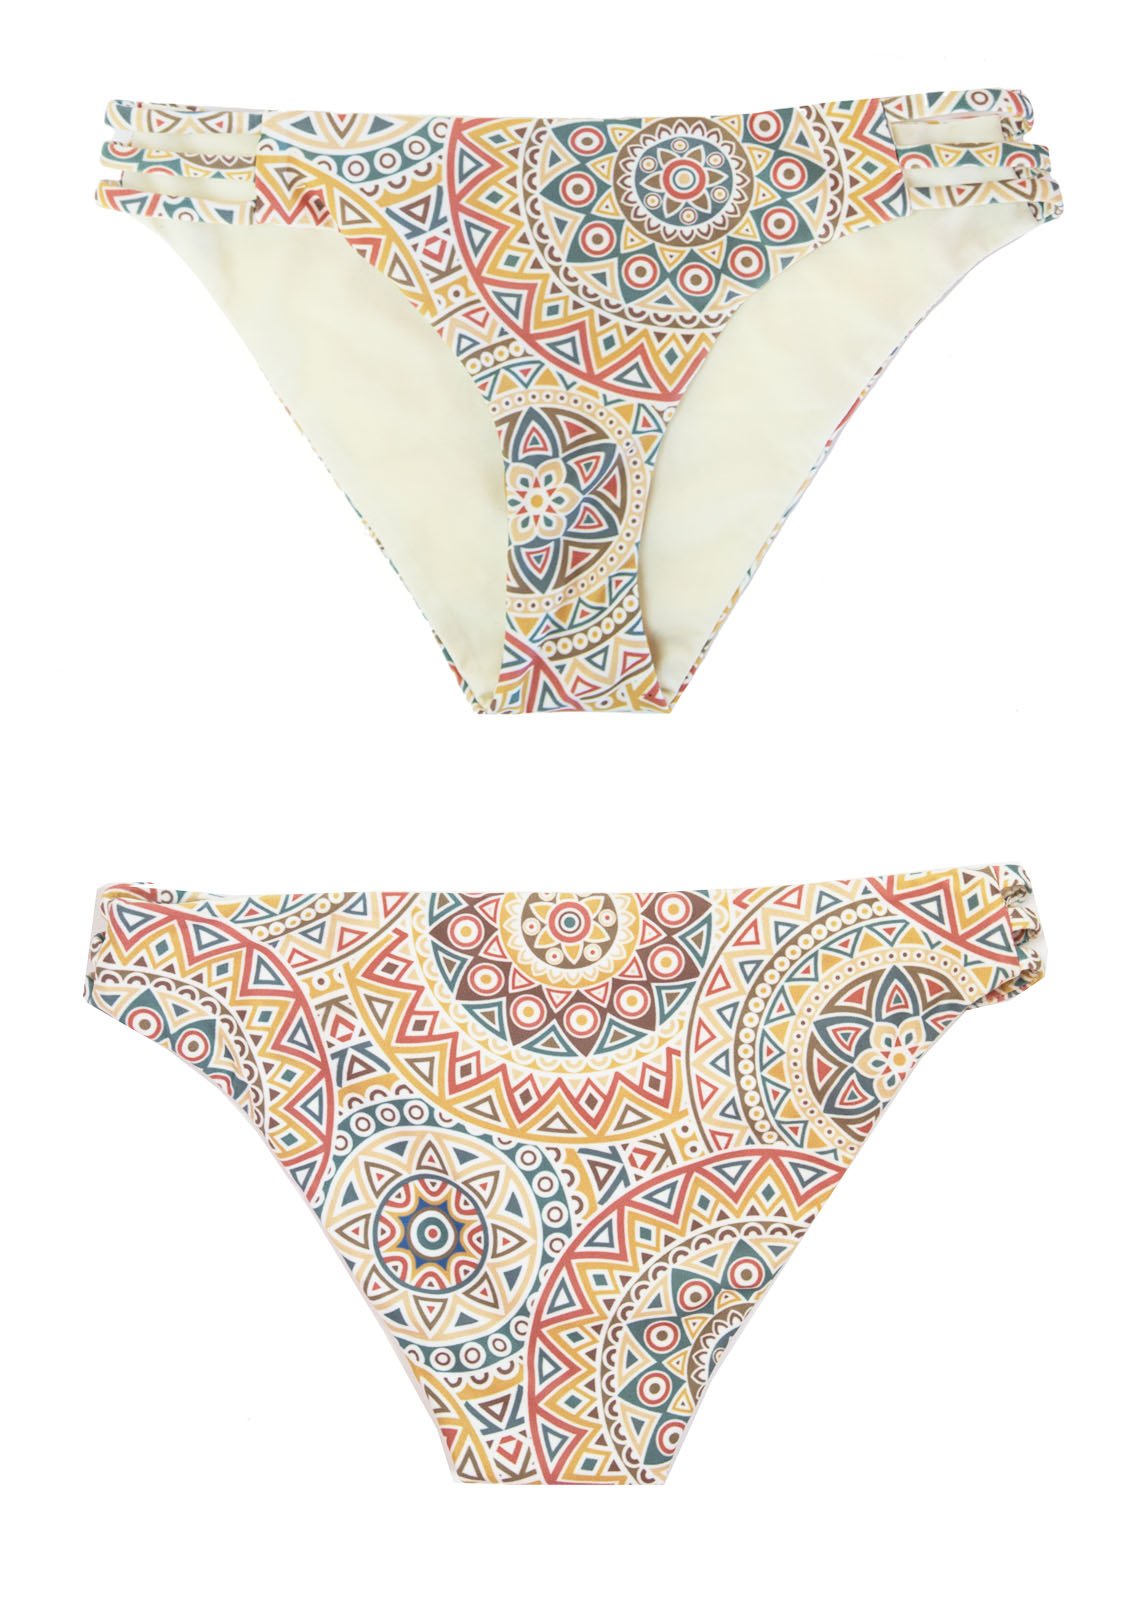 Classic Bikini Bottoms with a reversible solid light yellow side, and a mandala print.